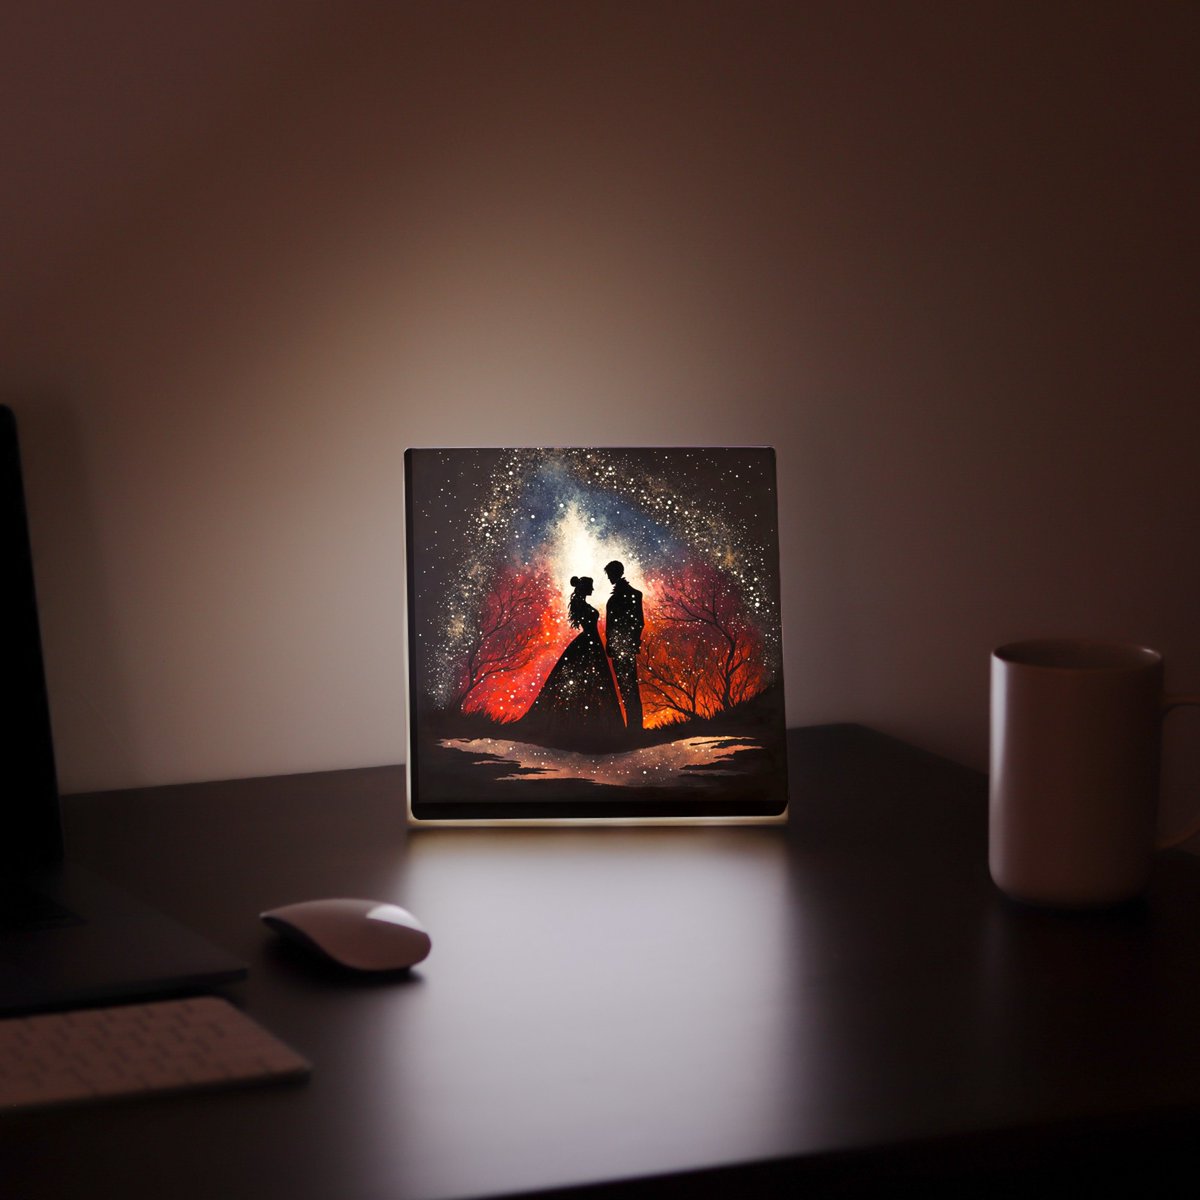 Create a unique tribute to your loved ones with a shining art canvas

#customcanvas #shiningart #memorialart #remembrancecanvas #lightedart #lovedoneart #glowingcanvas #custommemorial